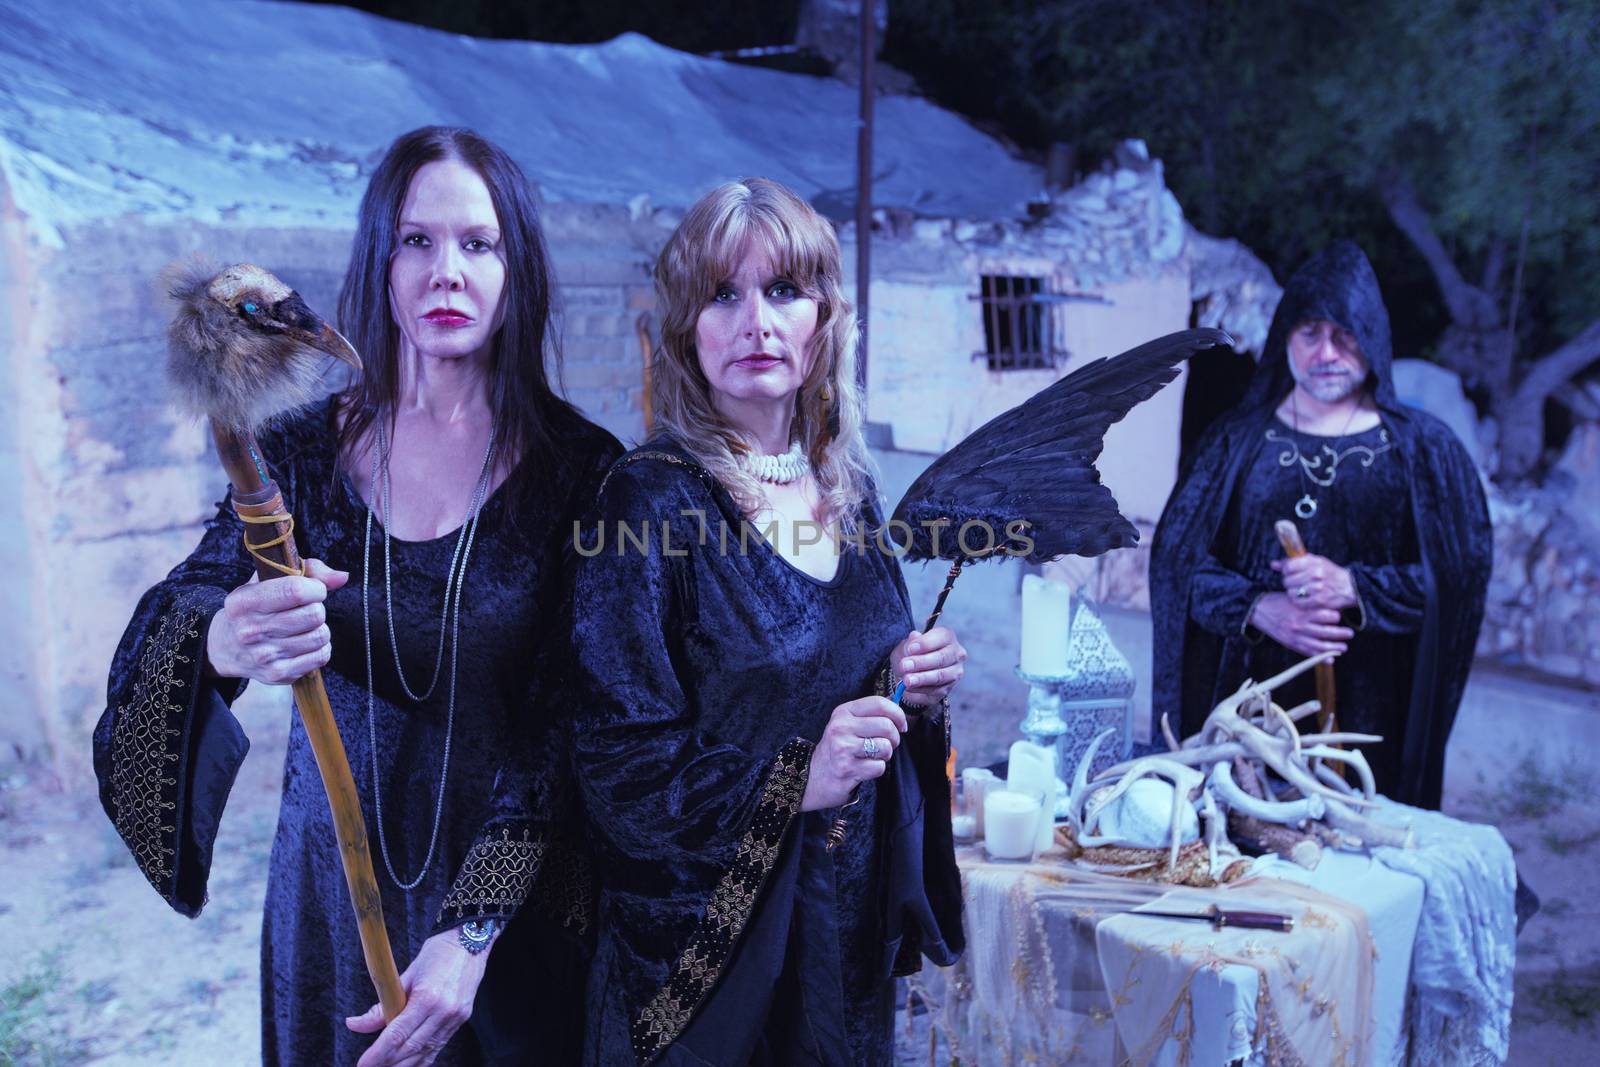 Witches with Fetishes in Ritual by Creatista